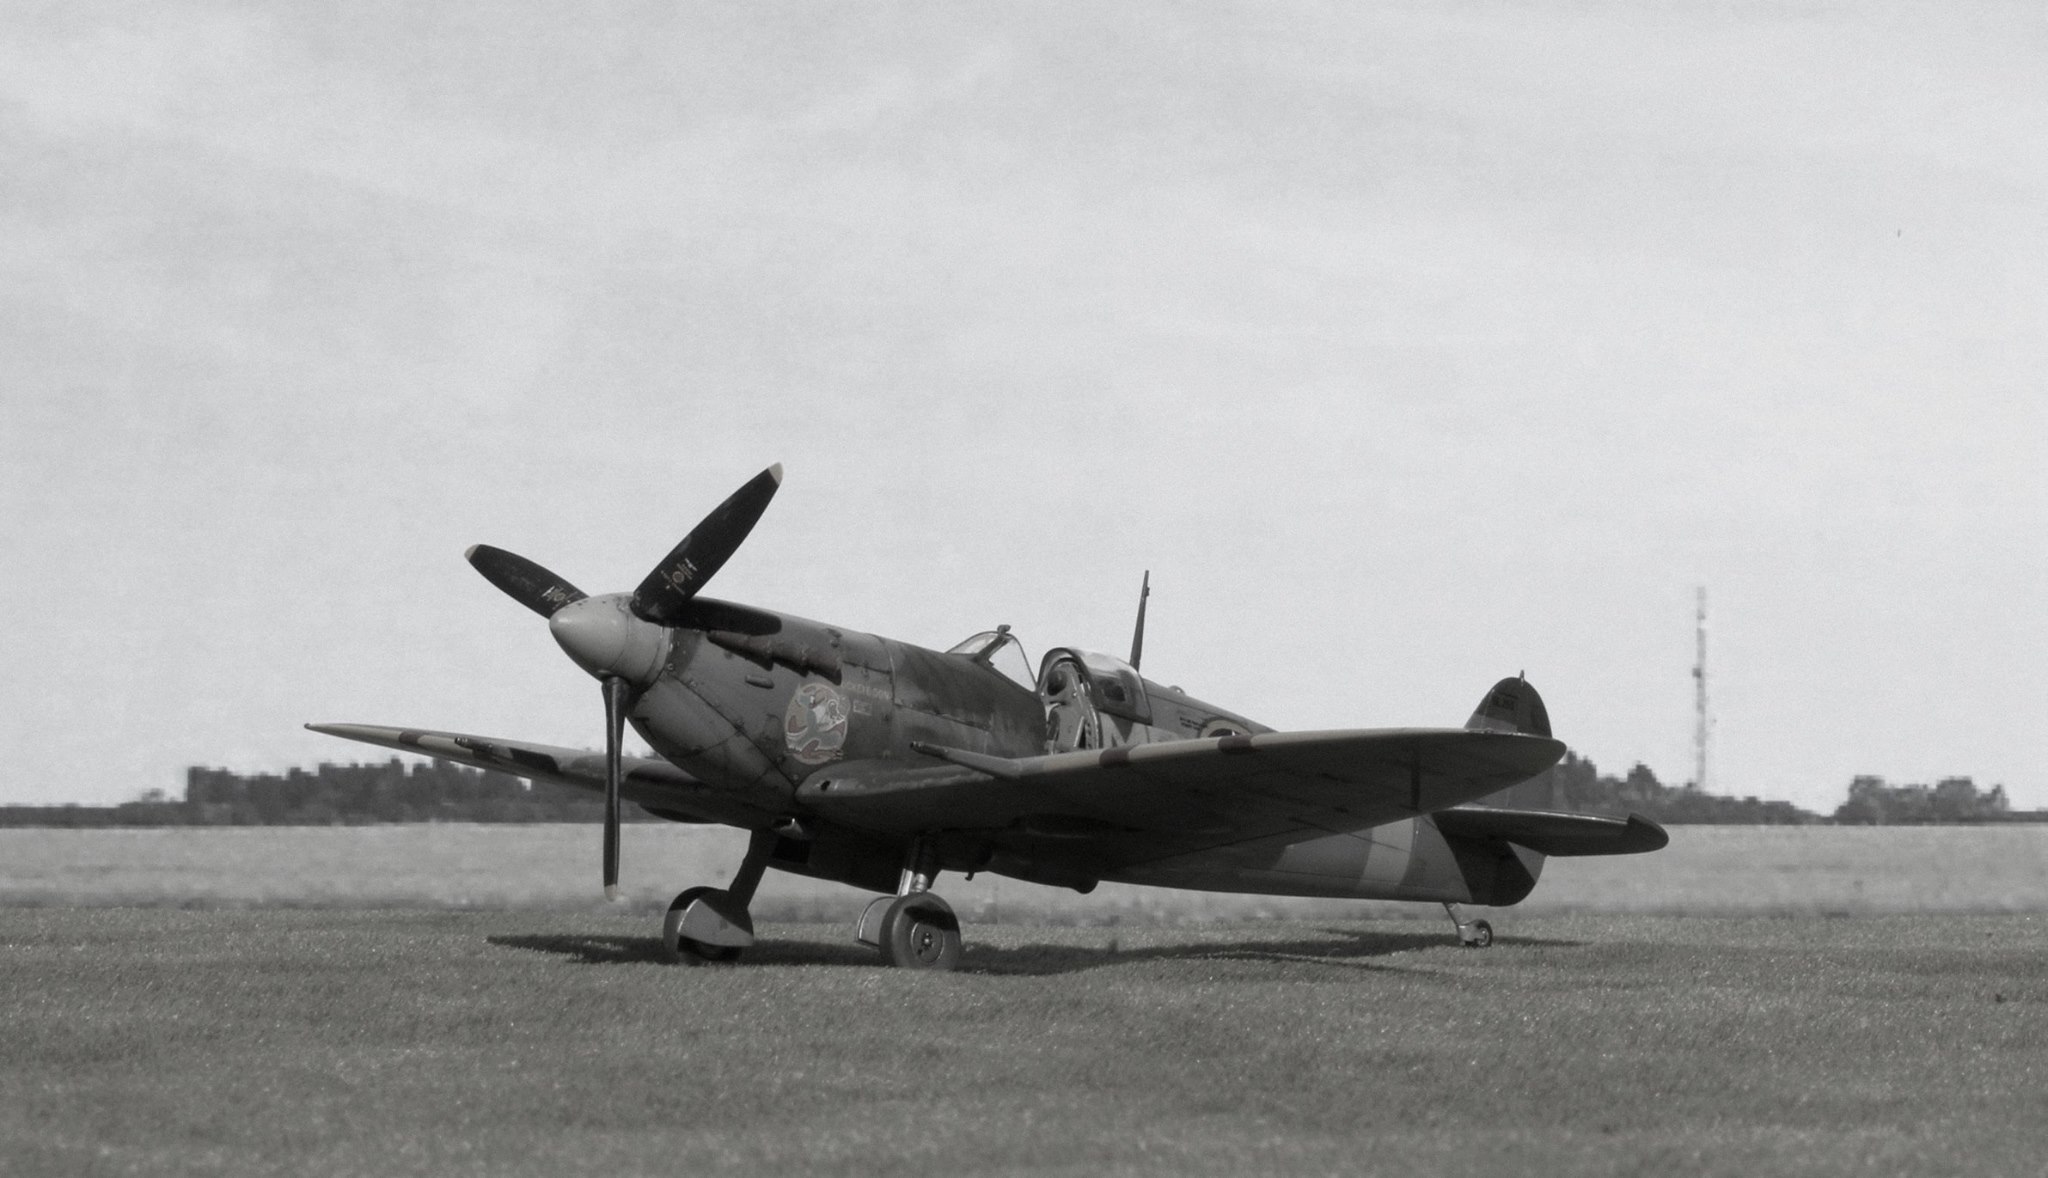 Spitfire Mk.Vb BL255 flown by Don Gentile 336th Fighter Squadron, 4th Fighter Group, USAAF at Debden August 1942